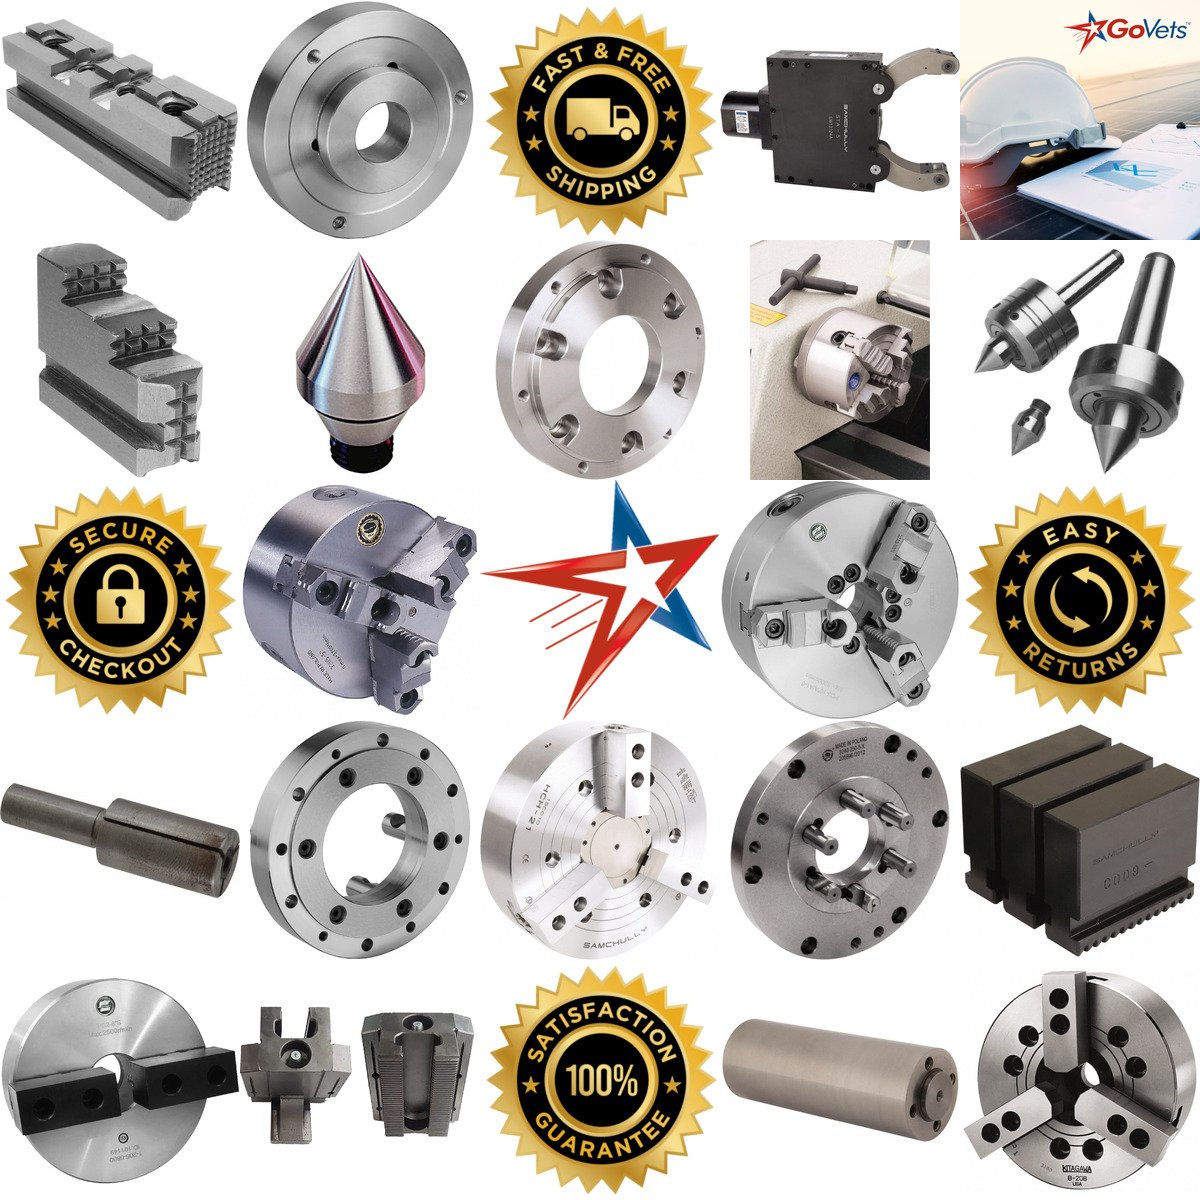 A selection of Lathe Chucks Centers Cylinders and Rests products on GoVets